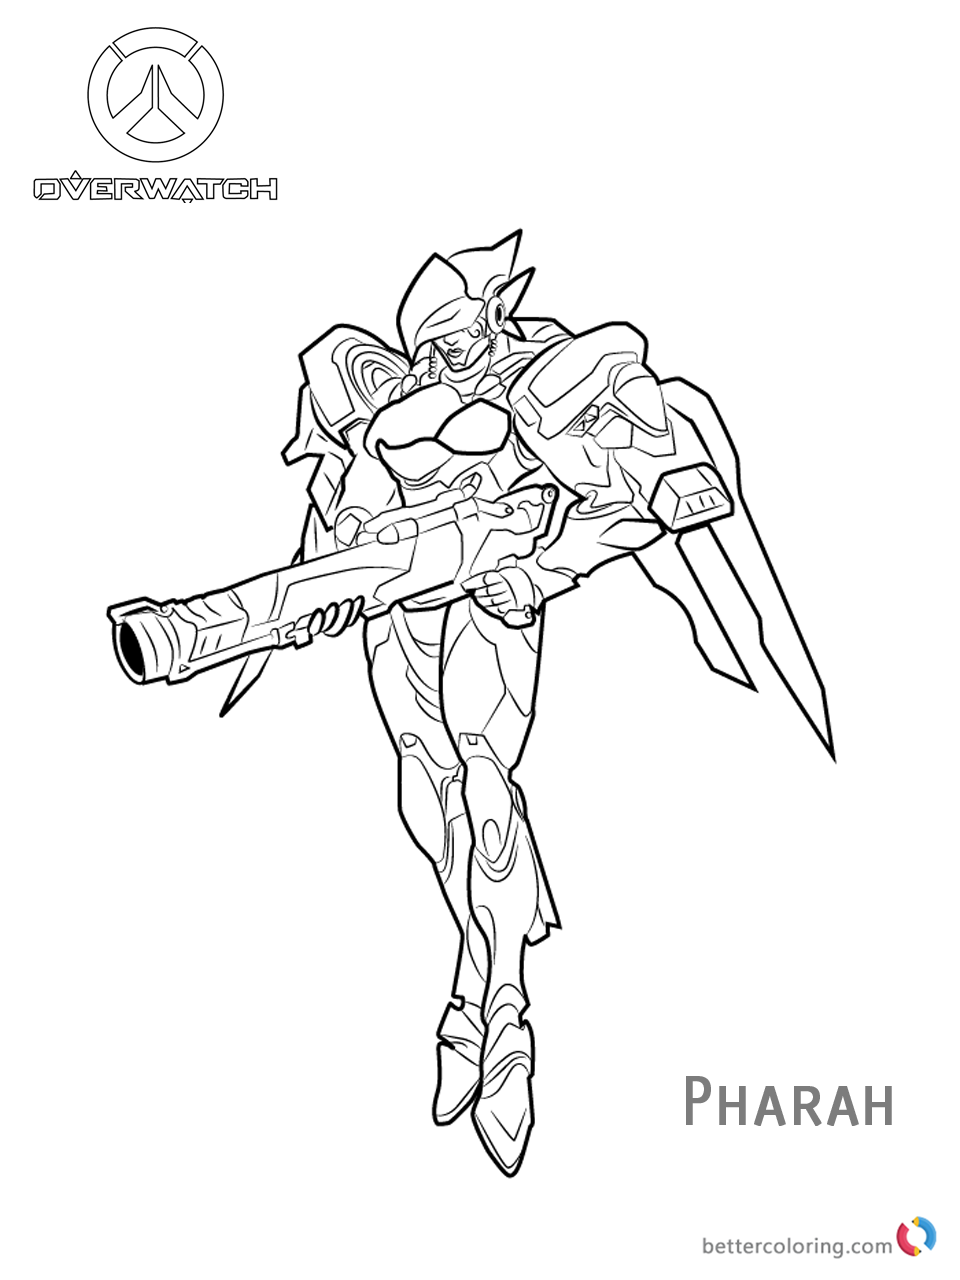 Pharah from Overwatch coloring pages printable